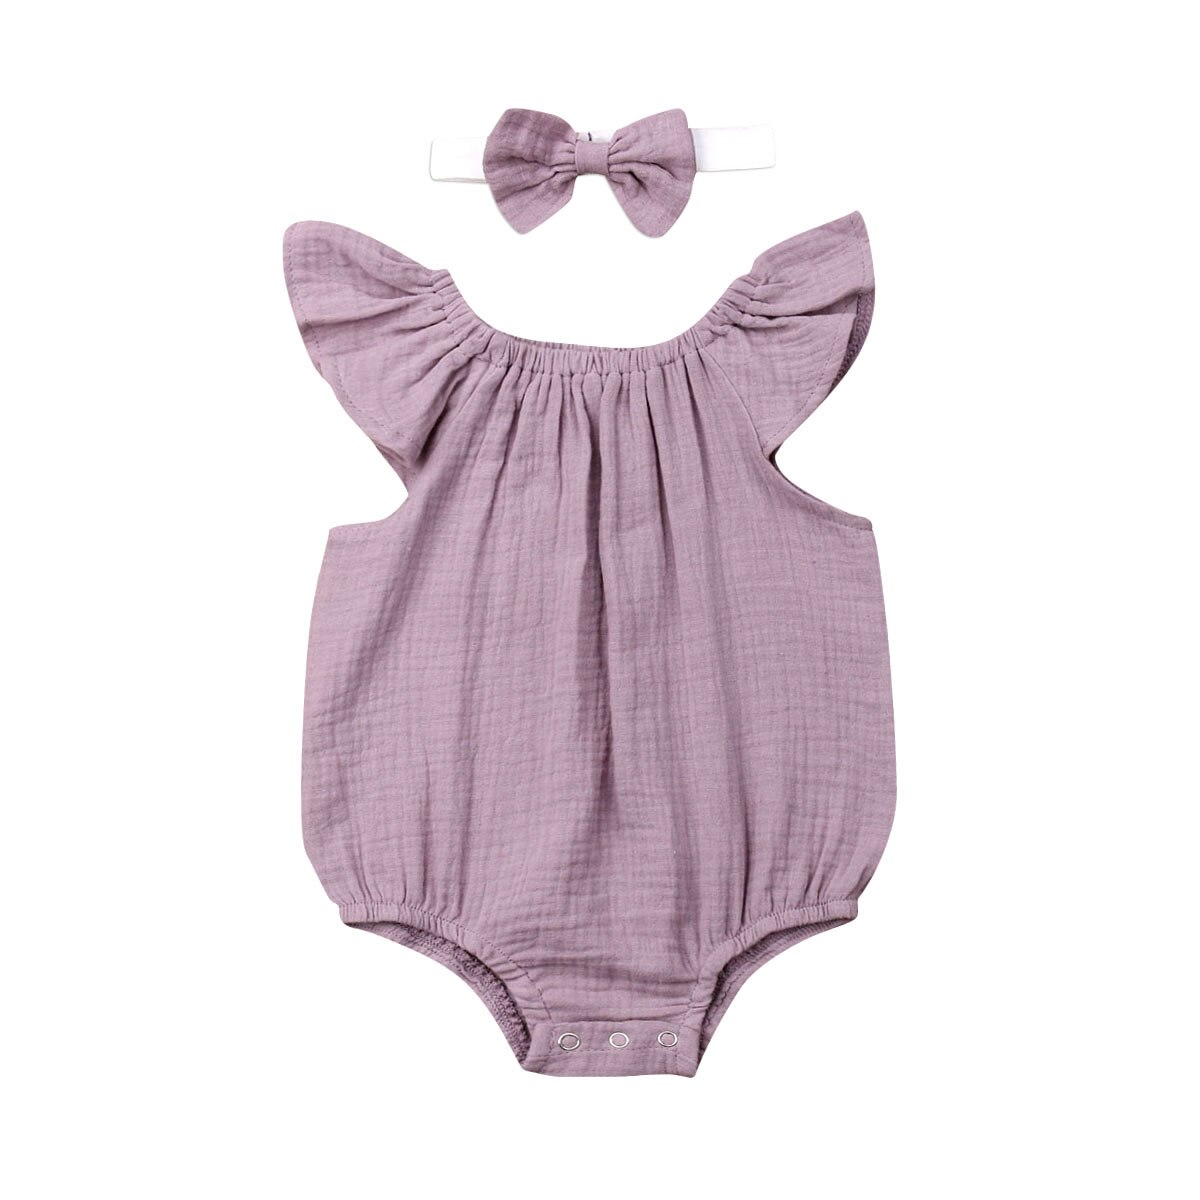 Summer Newborn Baby Girls Boys ruffled Romper Jumpsuit with headband Outfits Clothes Sunsuit 2pcs: 5 / 6M